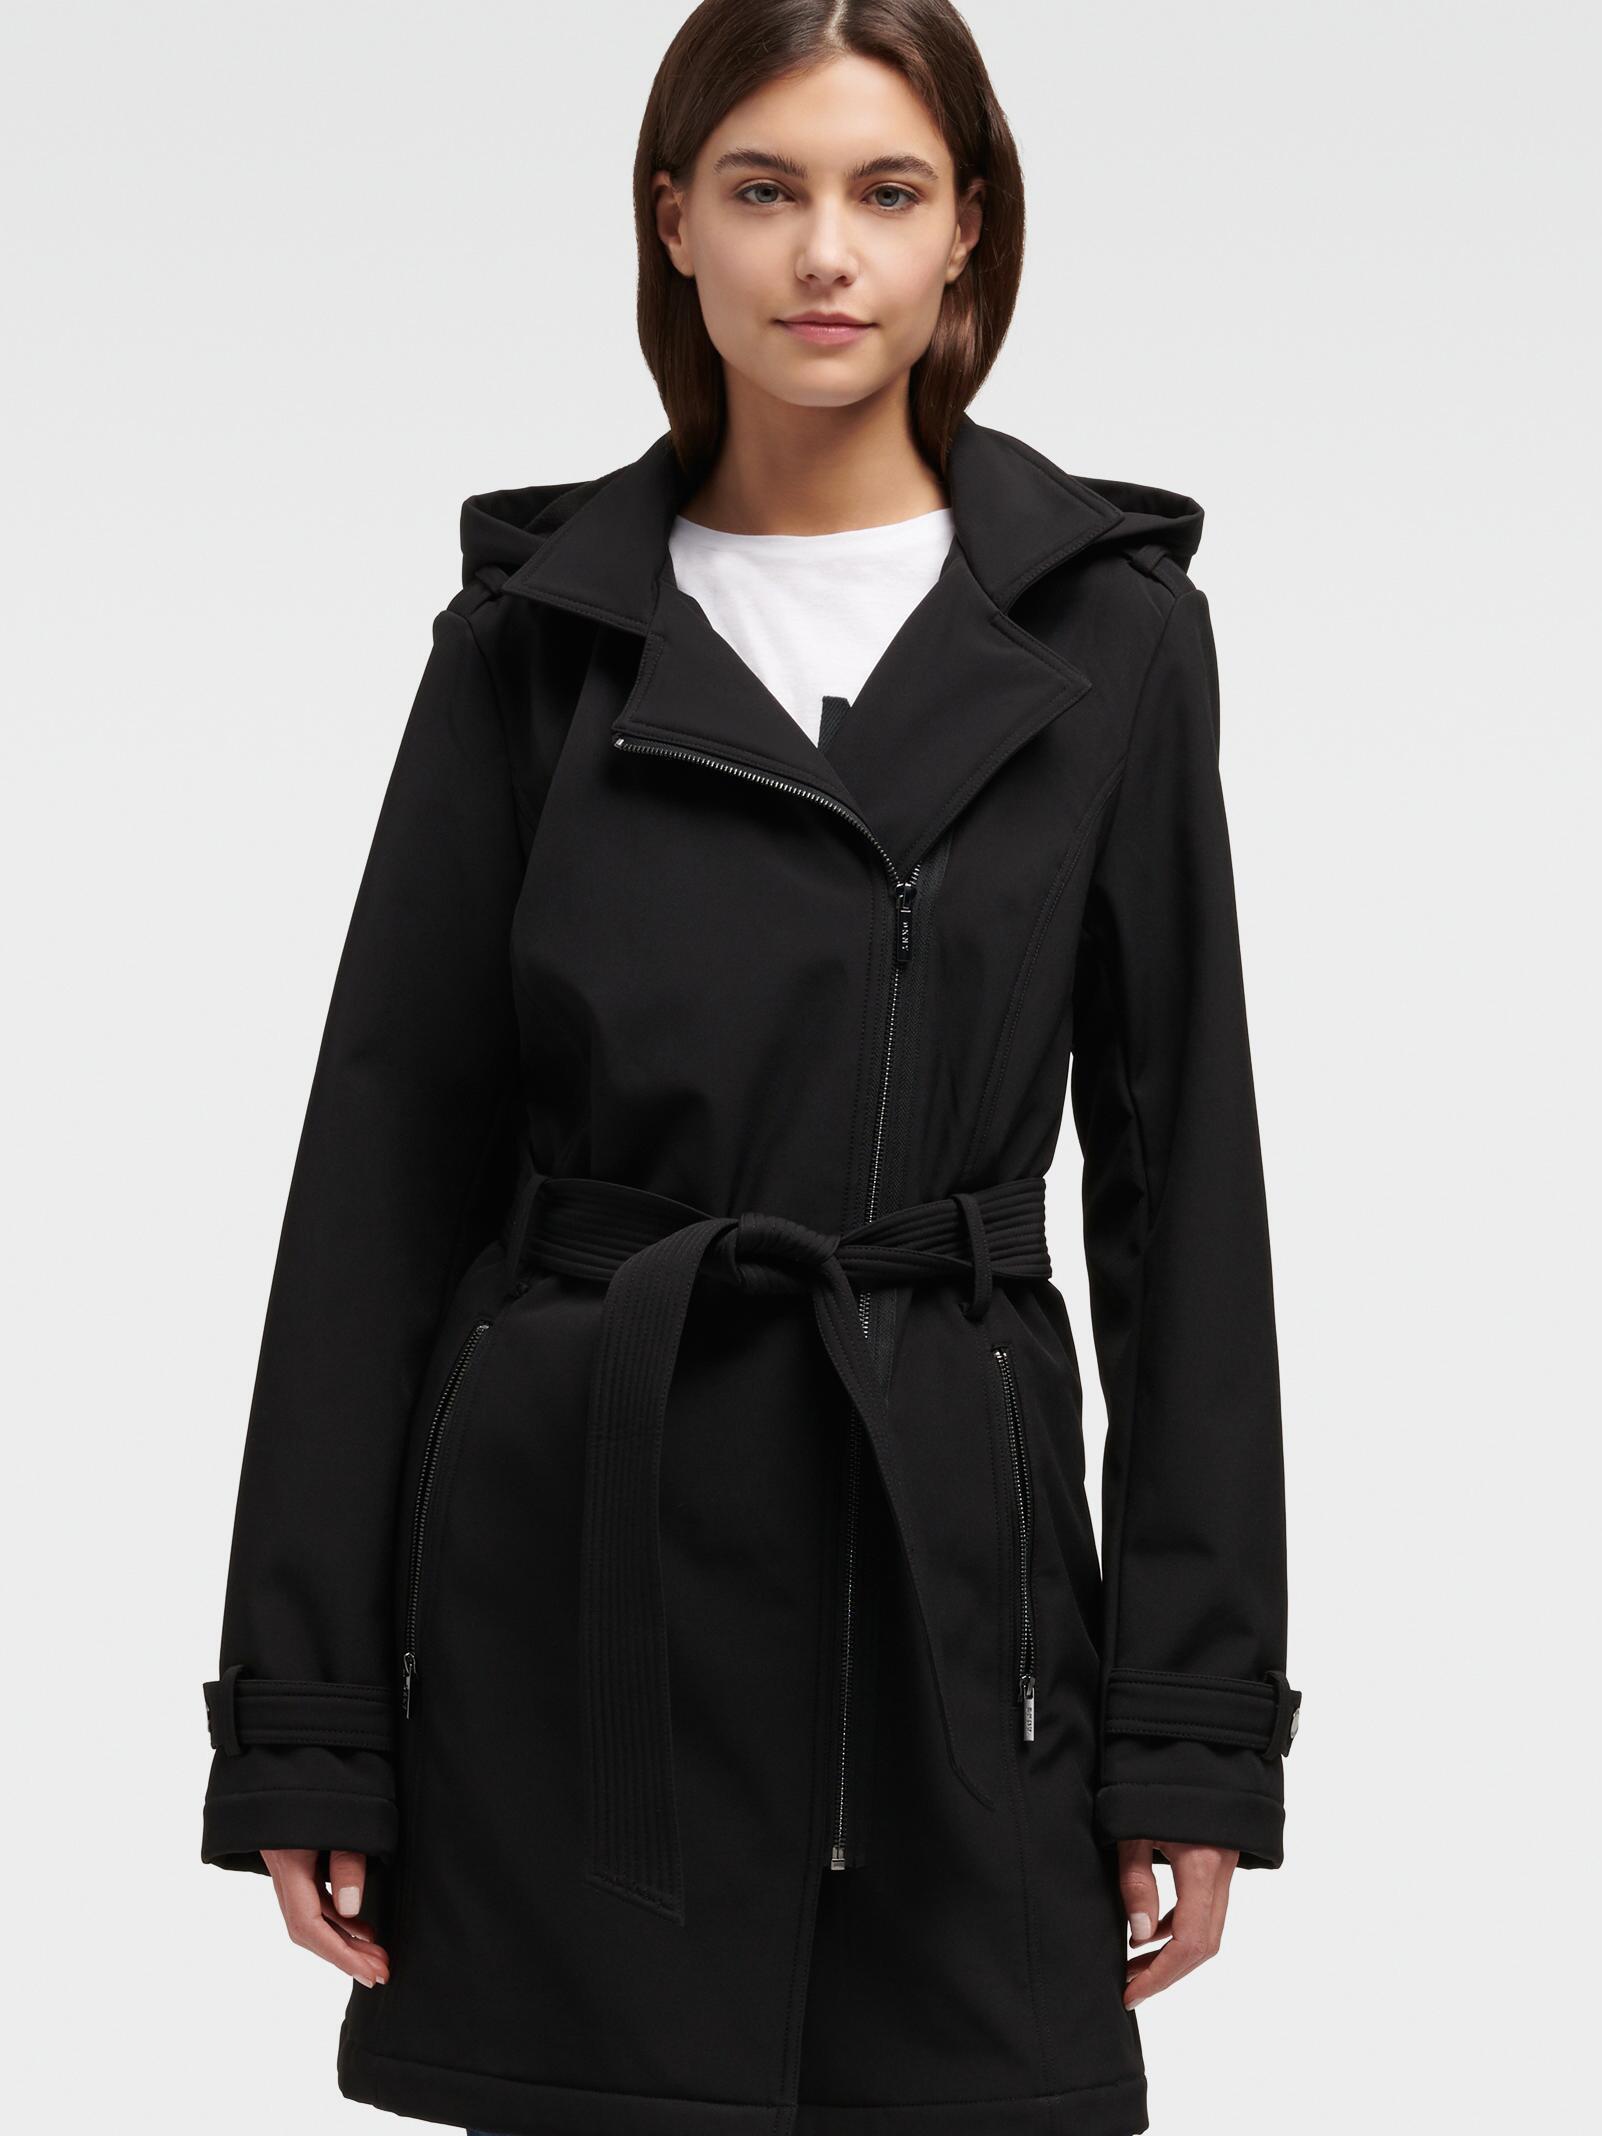 Lyst - DKNY Soft-shell Trench Coat in Black